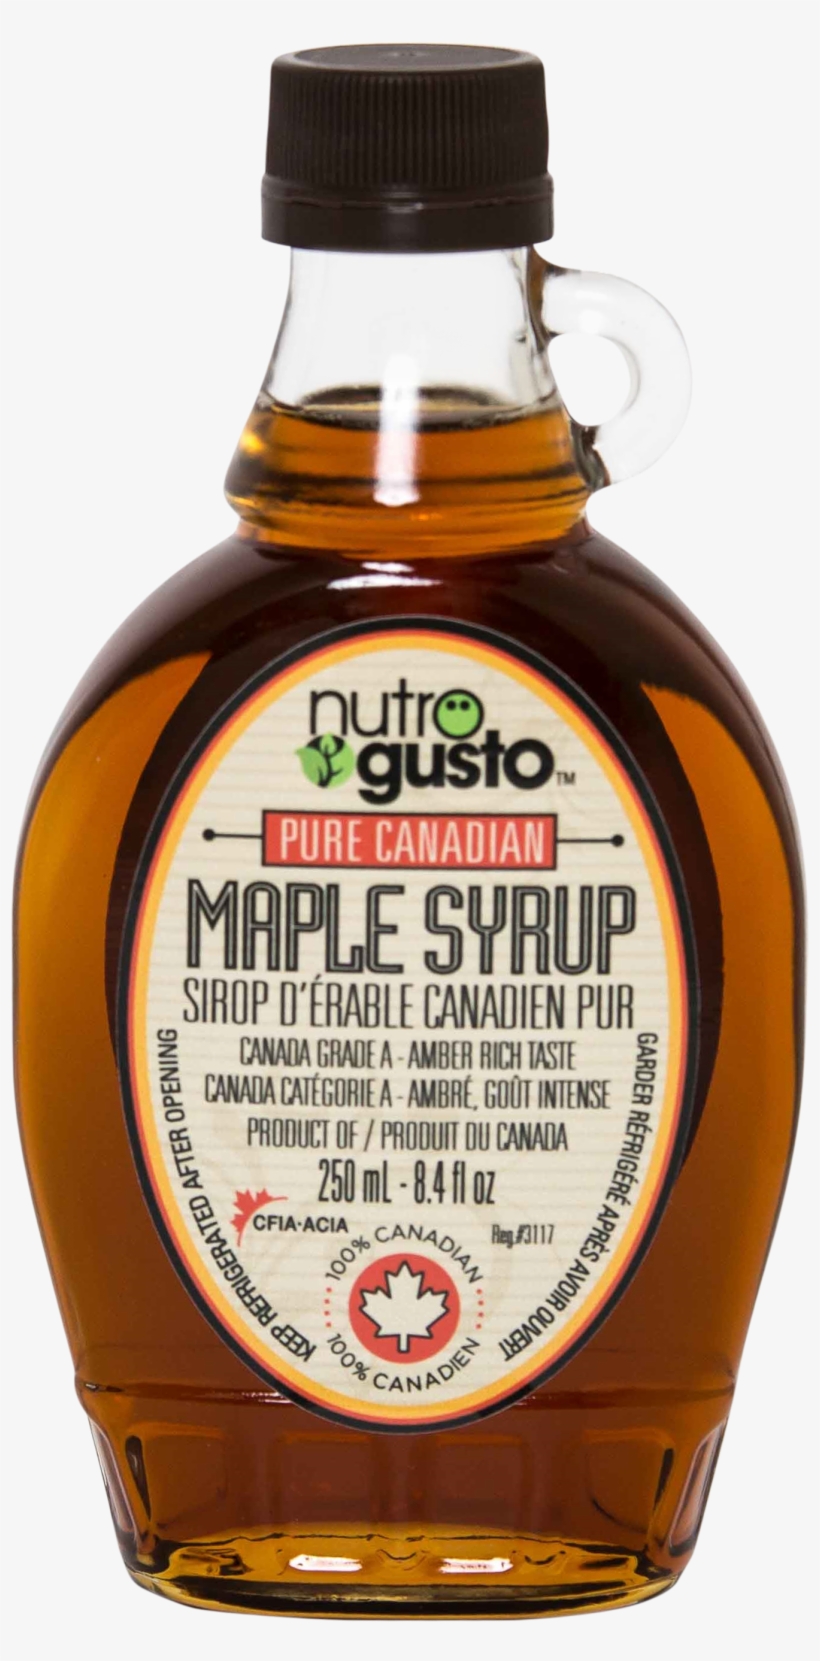 Nutrogusto Pure Canadian Maple Syrup 250ml - Tennessee Whiskey, transparent png #8783023